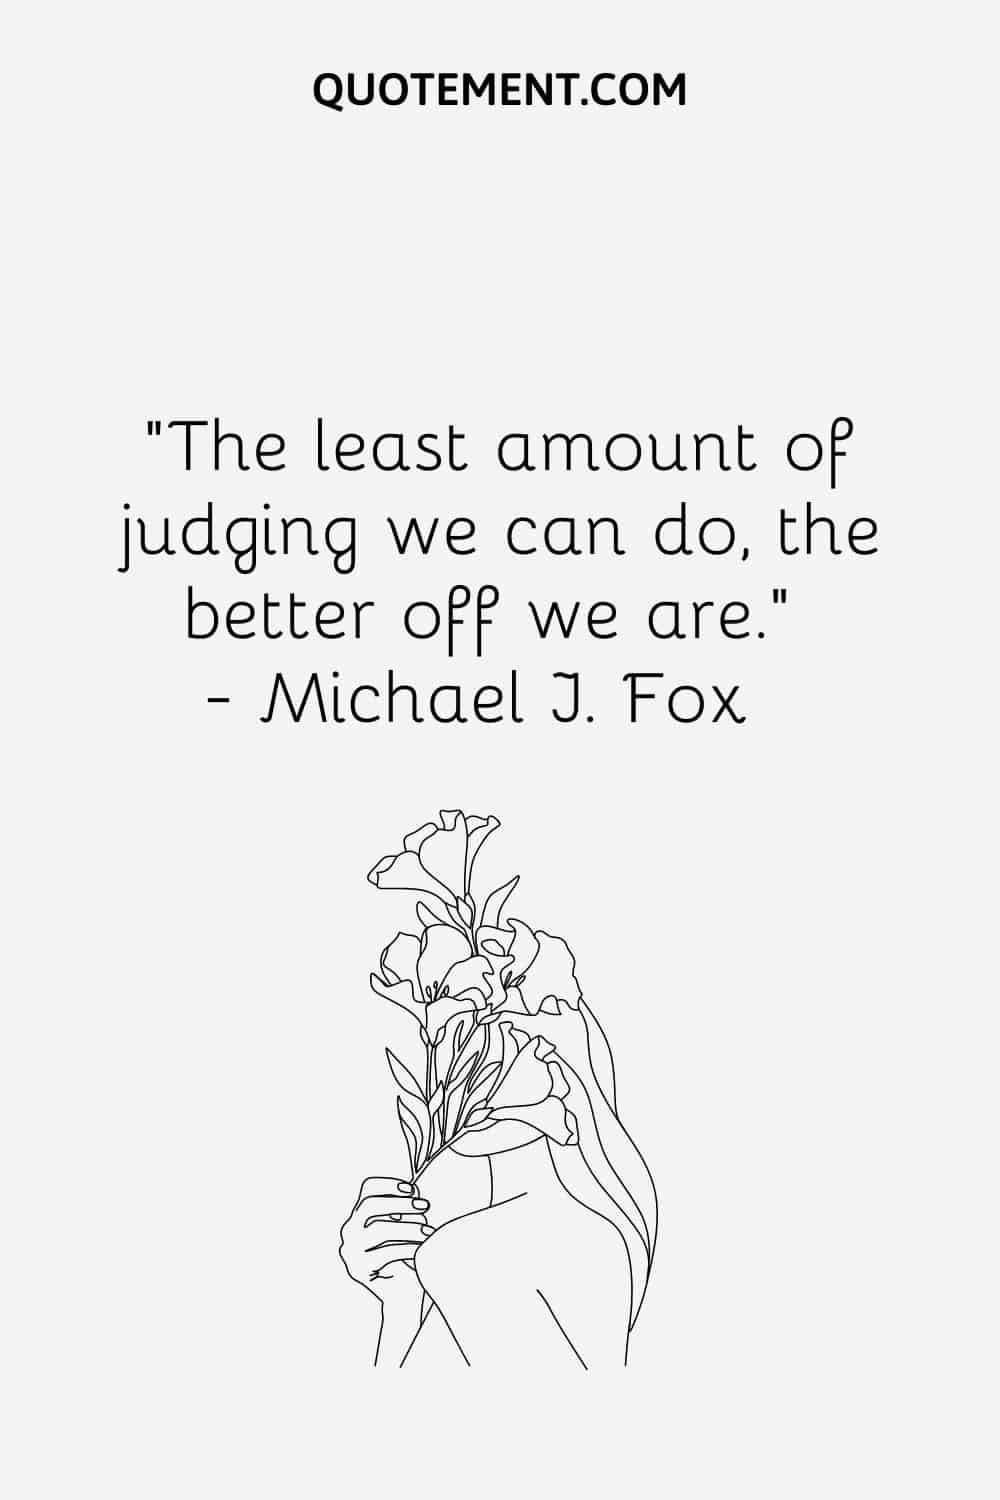 “The least amount of judging we can do, the better off we are.” — Michael J. Fox